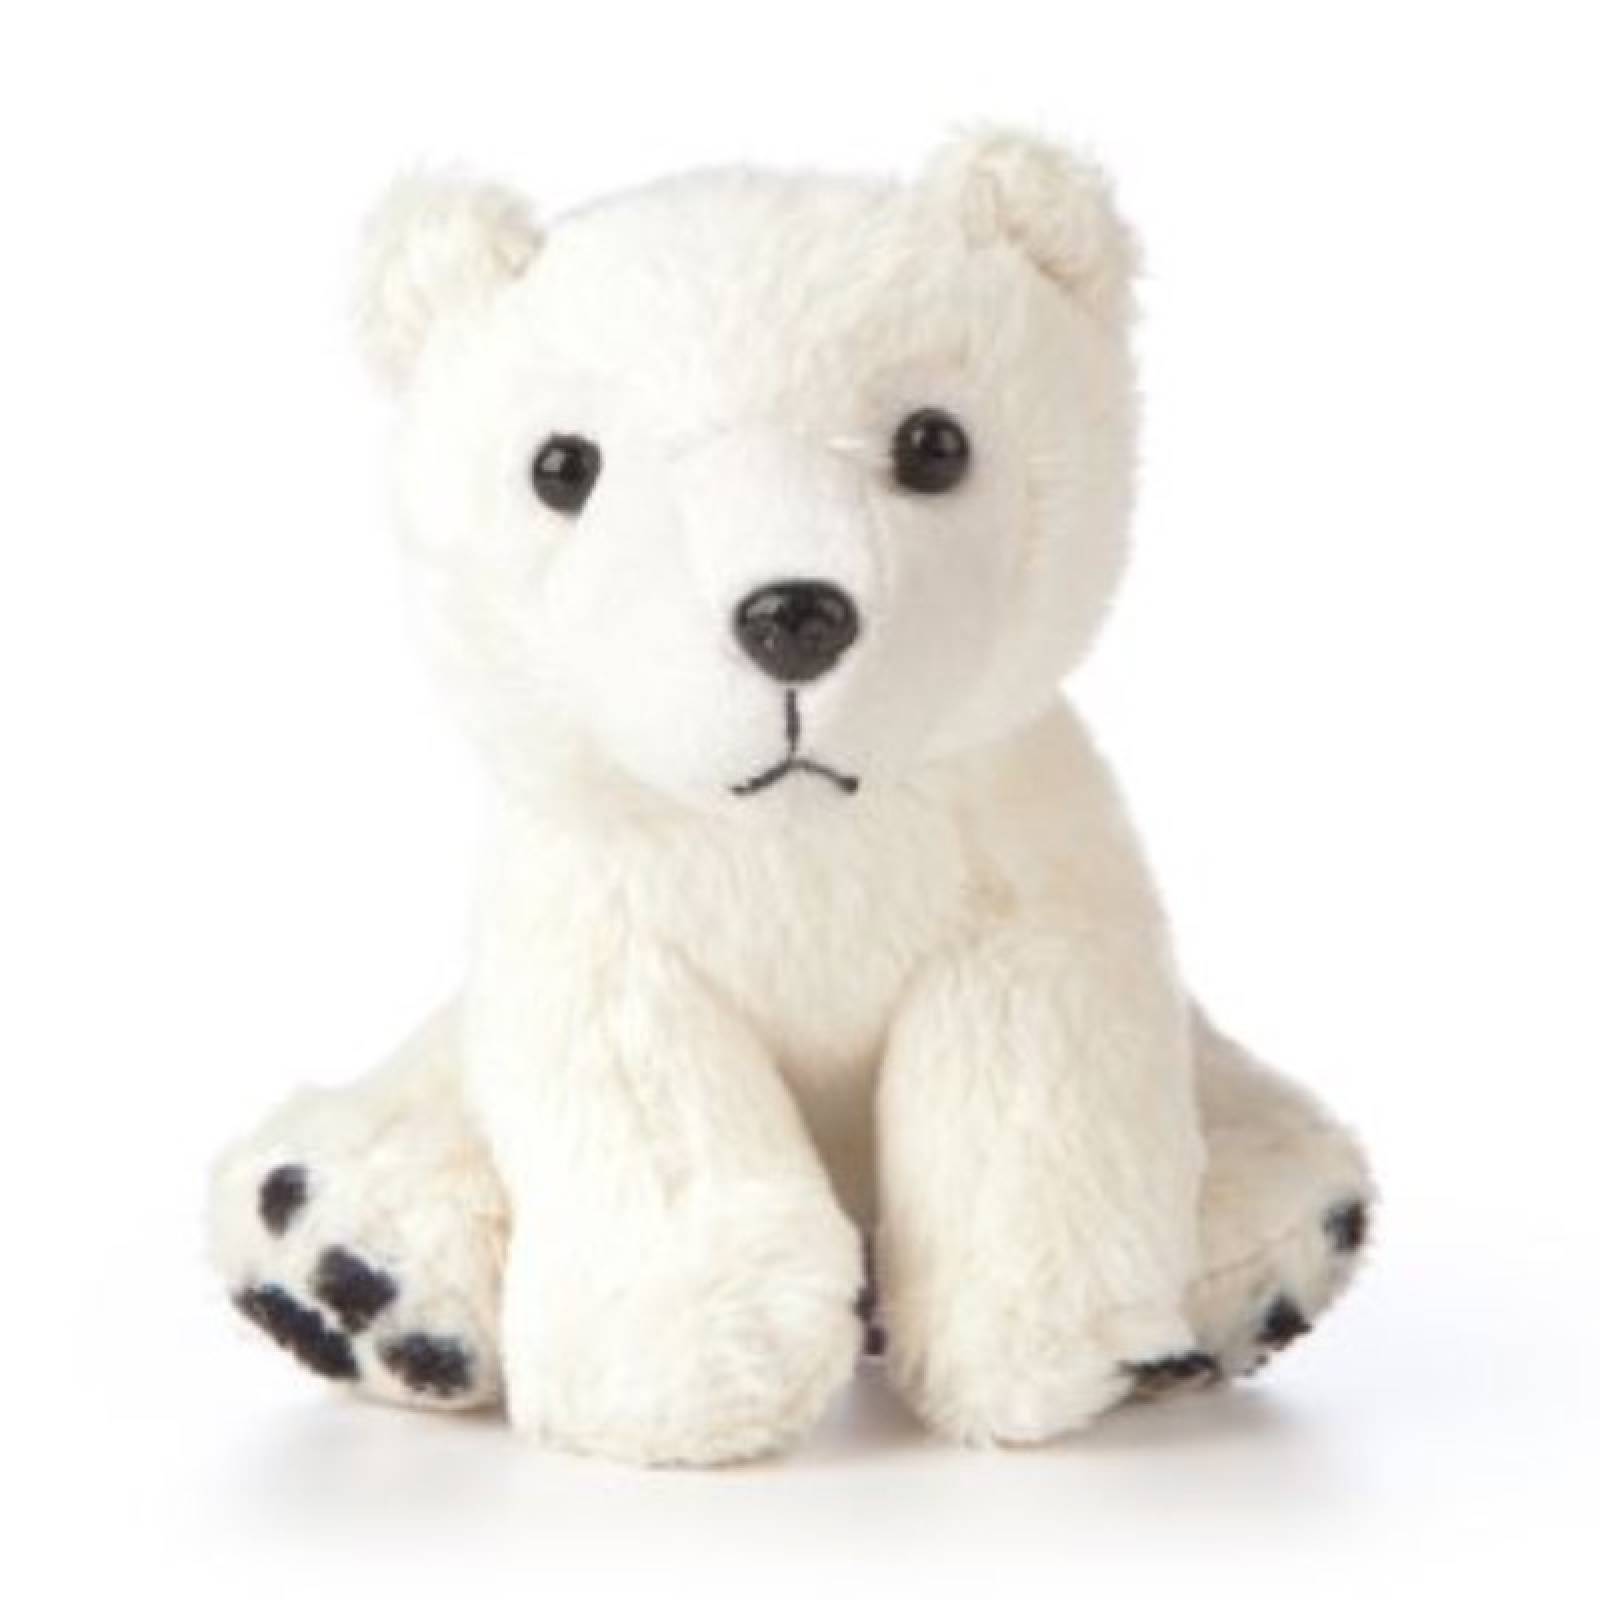 Smols Polar Bear Soft Toy - Made From Recycled Plastic 0+